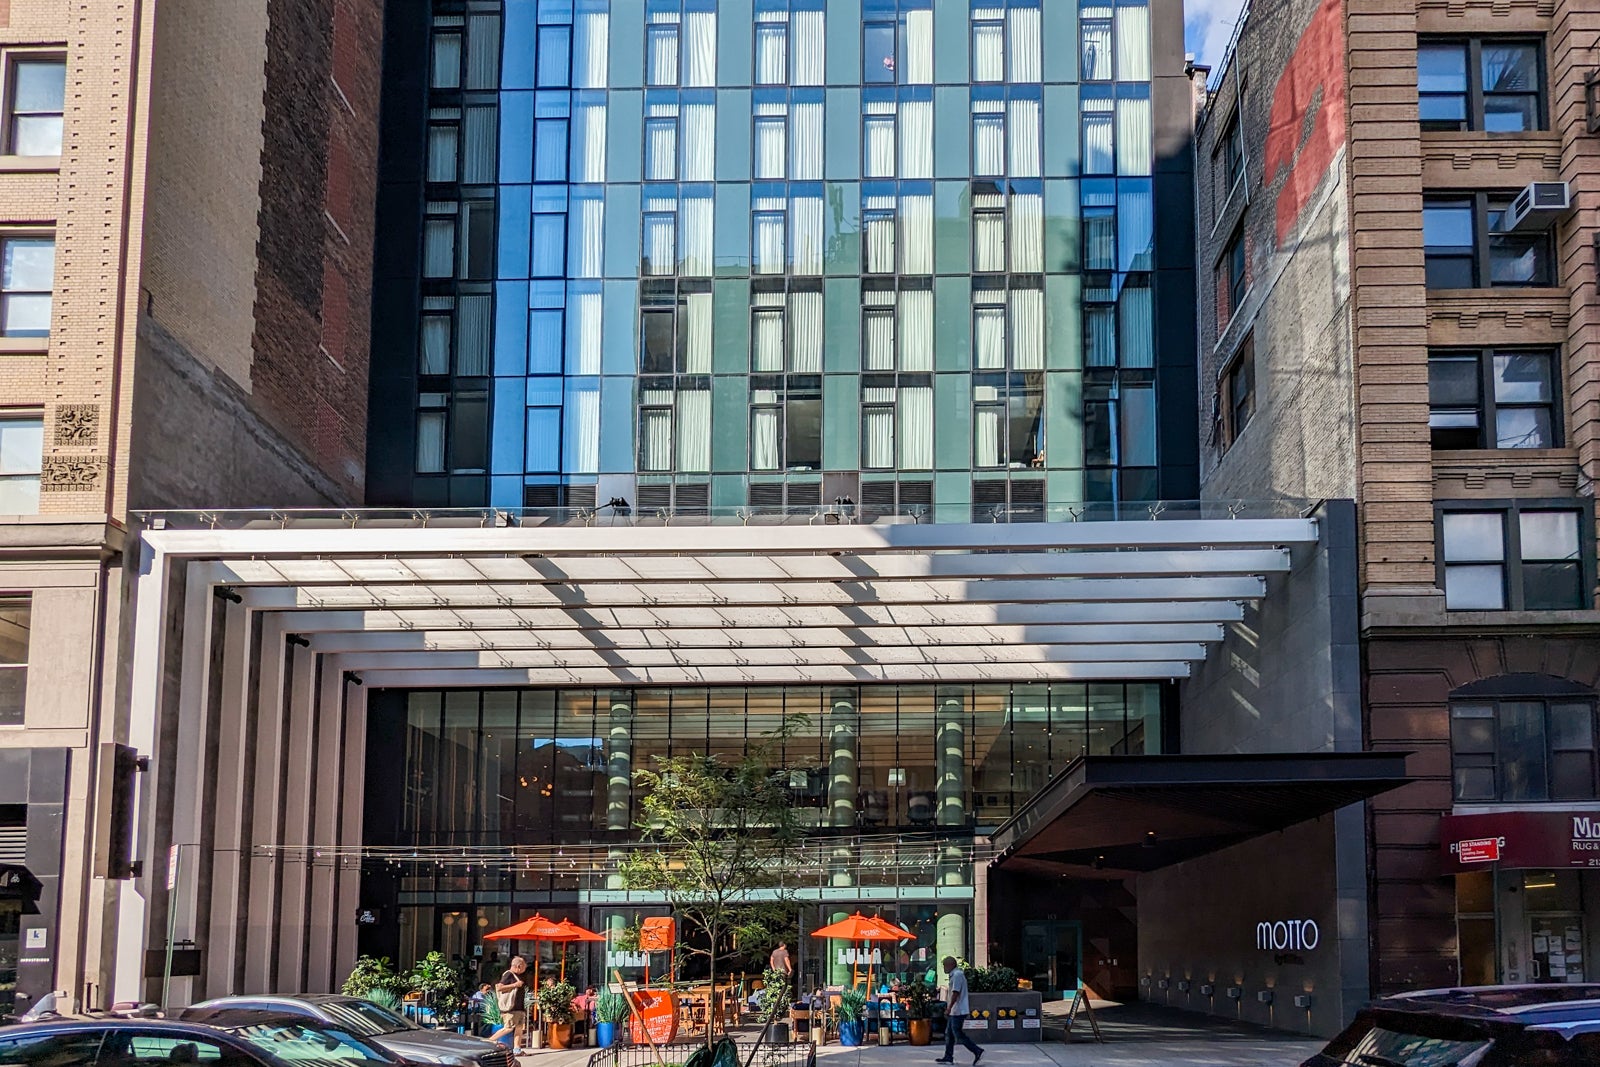 Motto by Hilton New York City Chelsea review: Economical rooms with ...